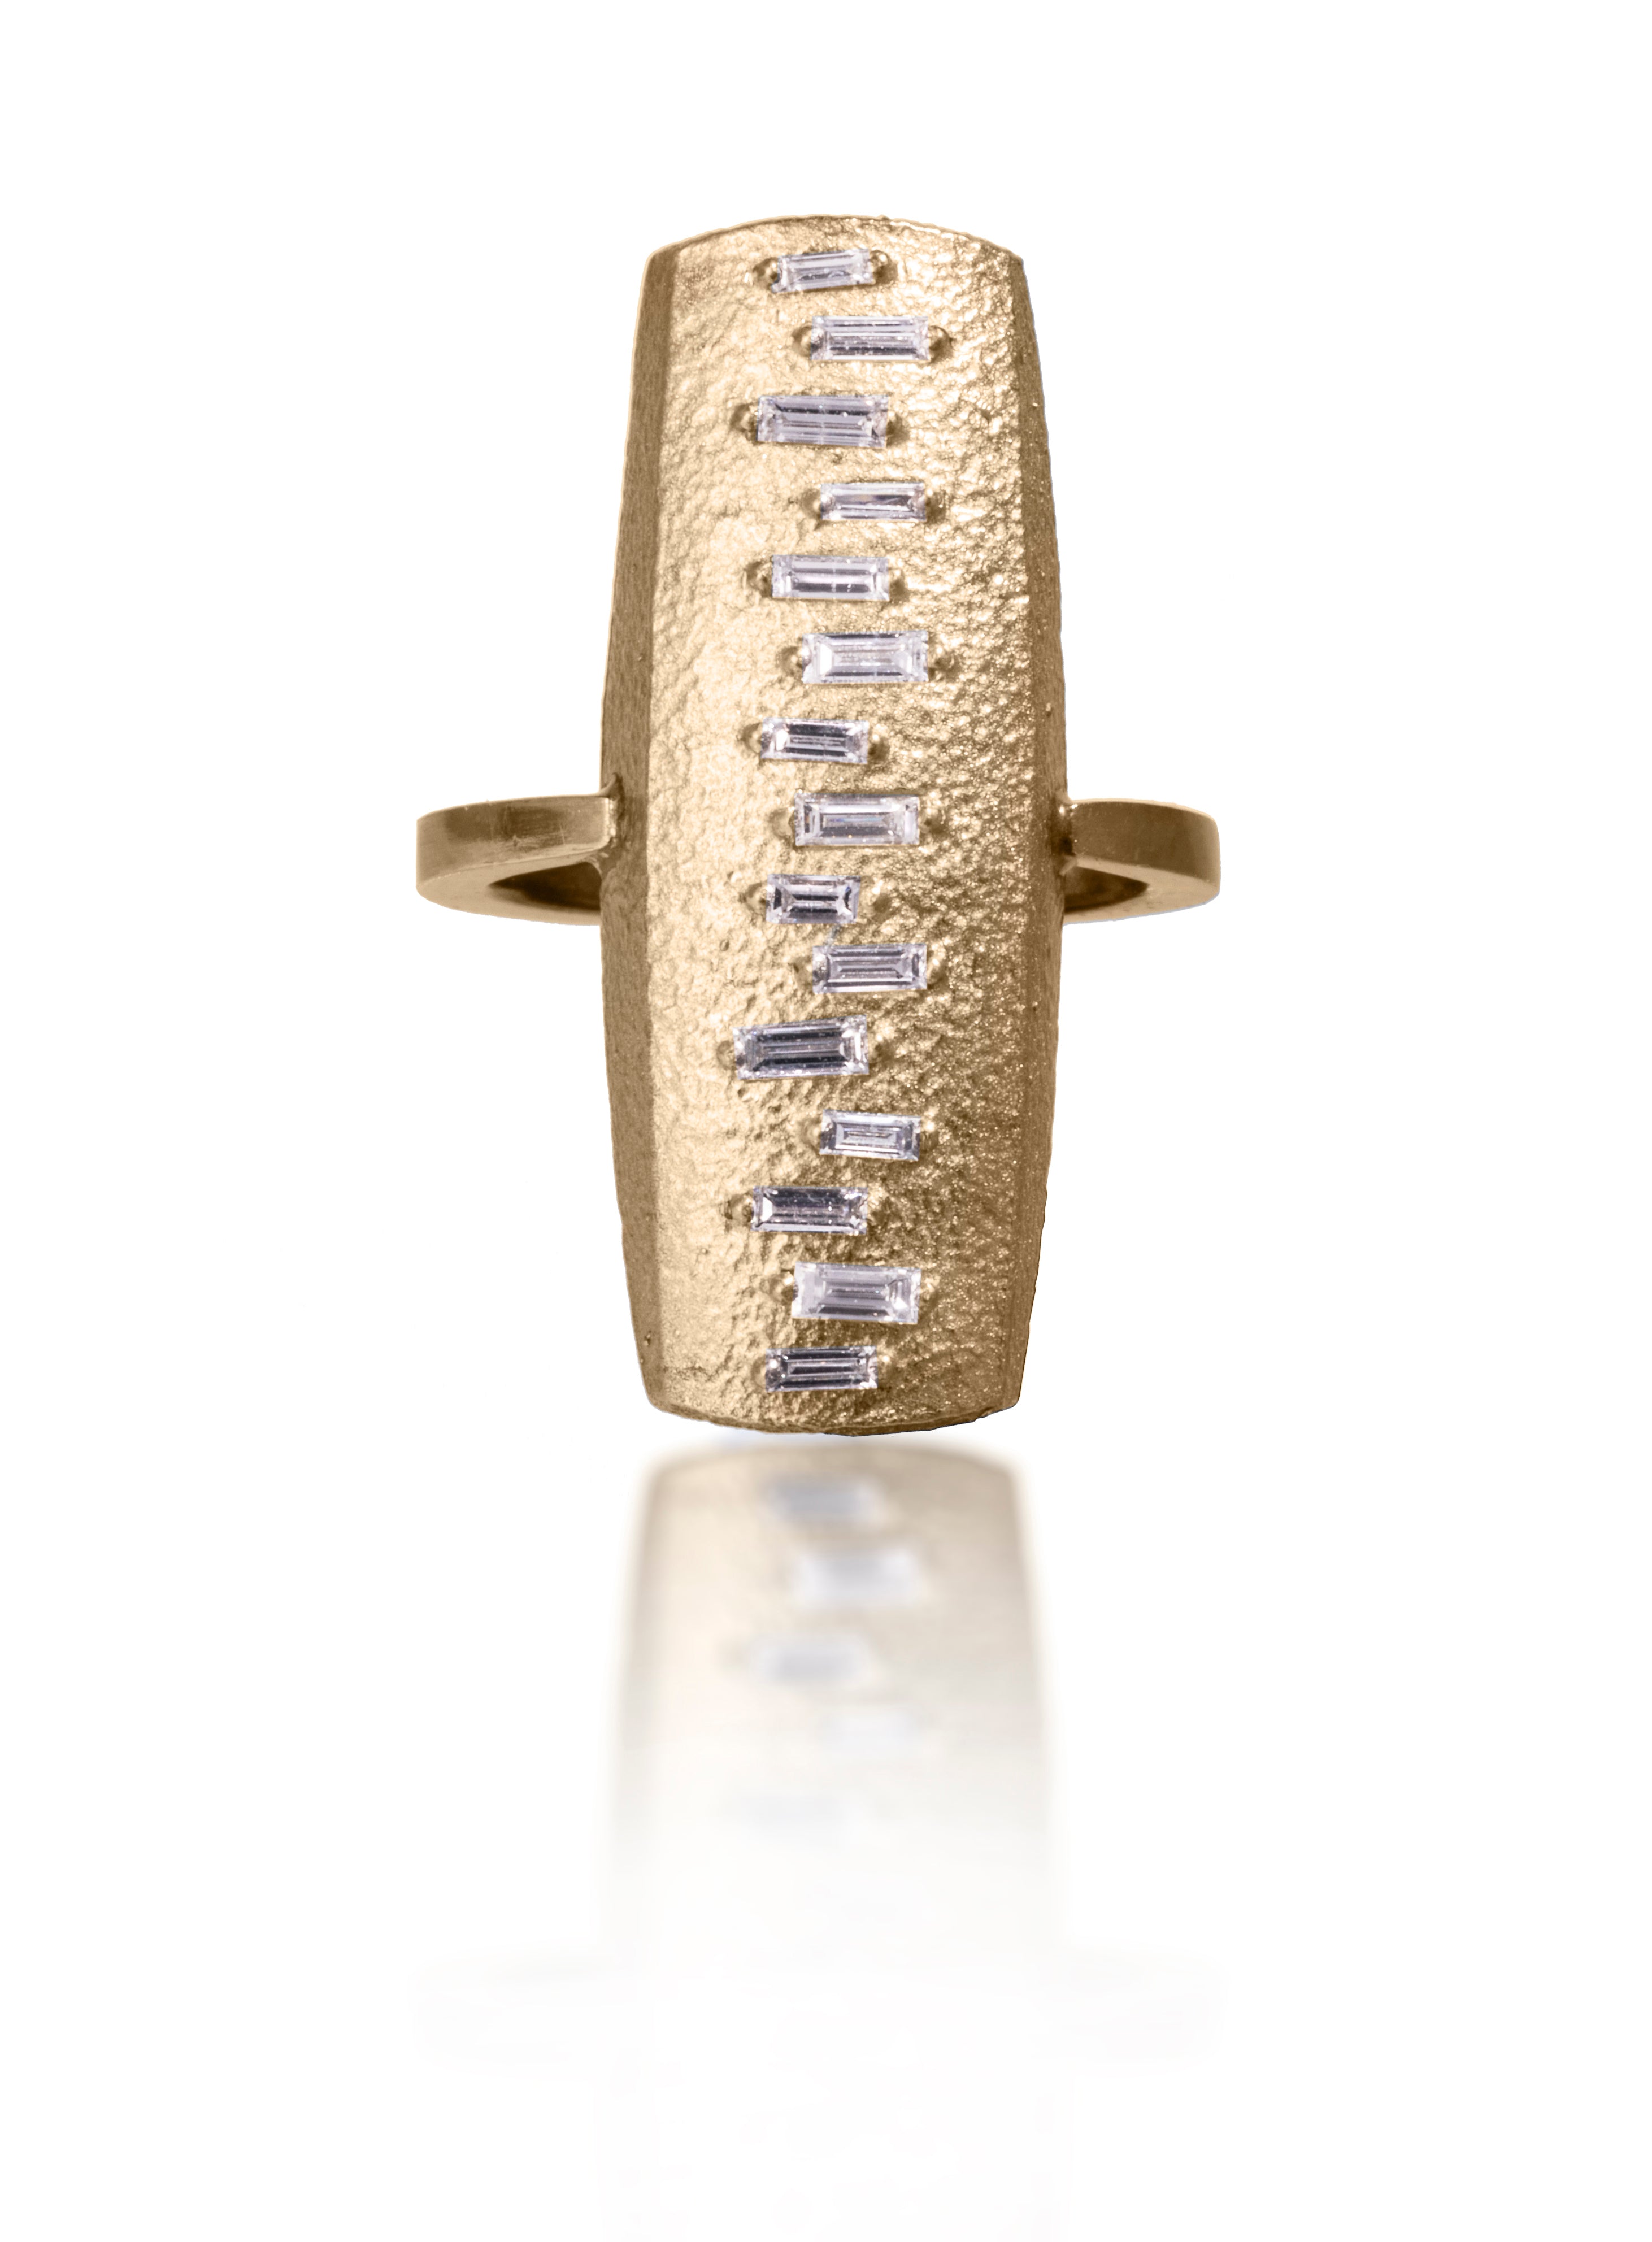 This large pendant ring is set with 15 white diamond baguettes. It is available in three richly textured color ways, oxidized silver, 18k gold, and palladium.  The graceful irregularity of the baguette angles catch the light in exciting ways when worn. 0.4713 tcw.